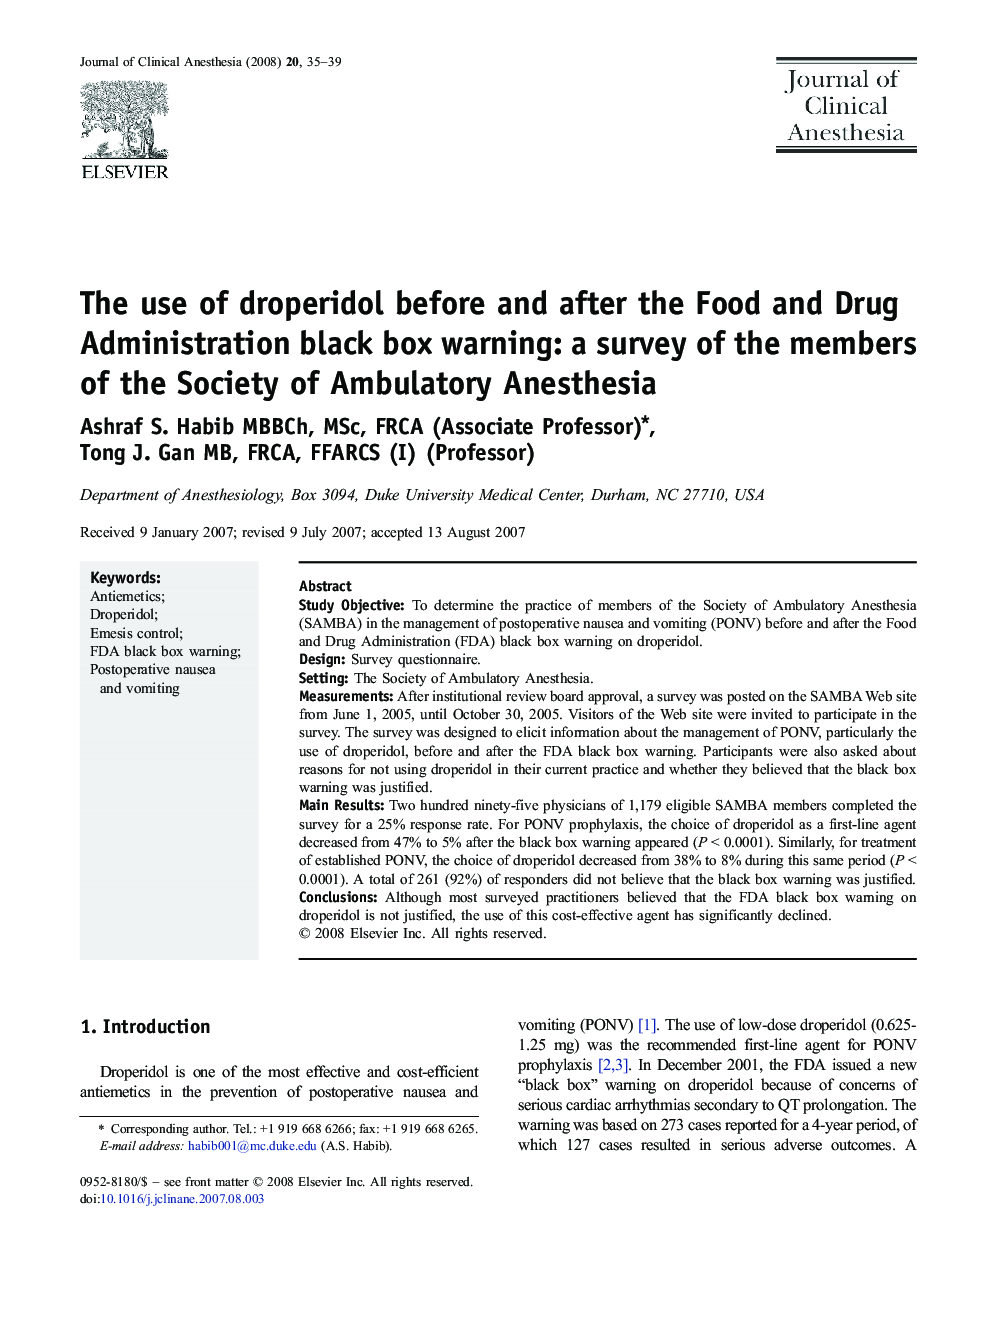 The use of droperidol before and after the Food and Drug Administration black box warning: a survey of the members of the Society of Ambulatory Anesthesia